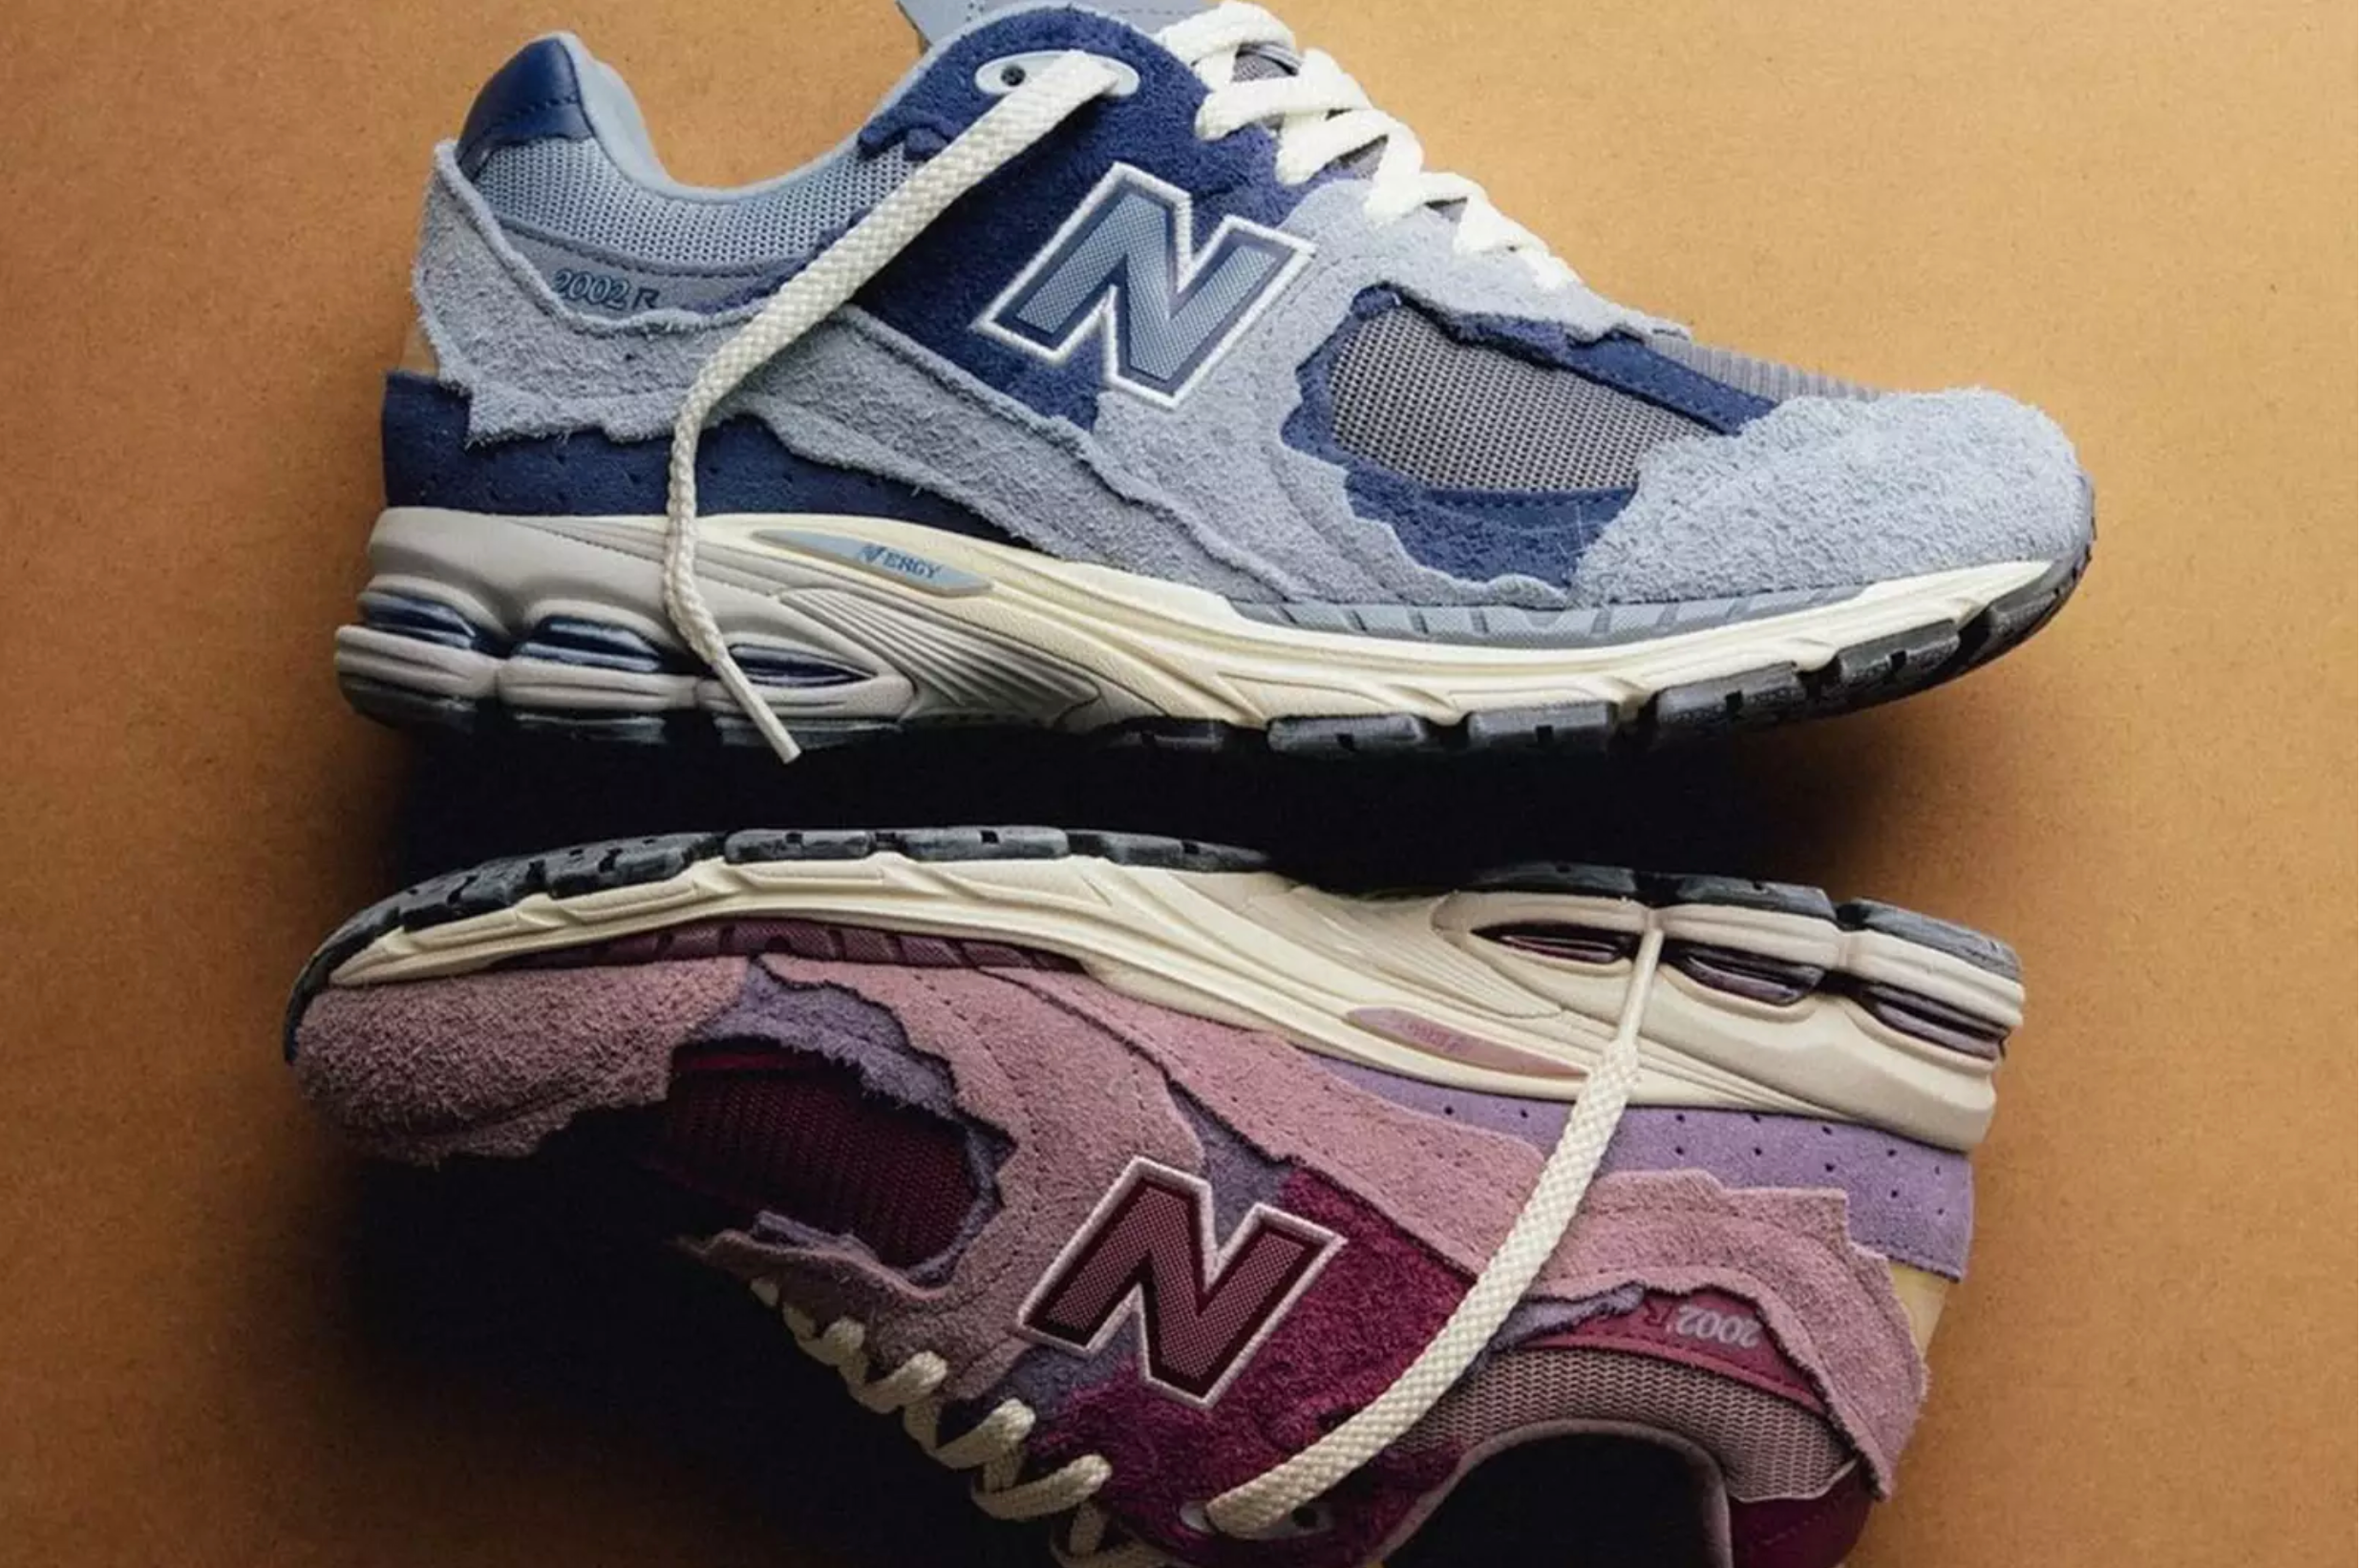 New Balance's "Protection Pack" is Back